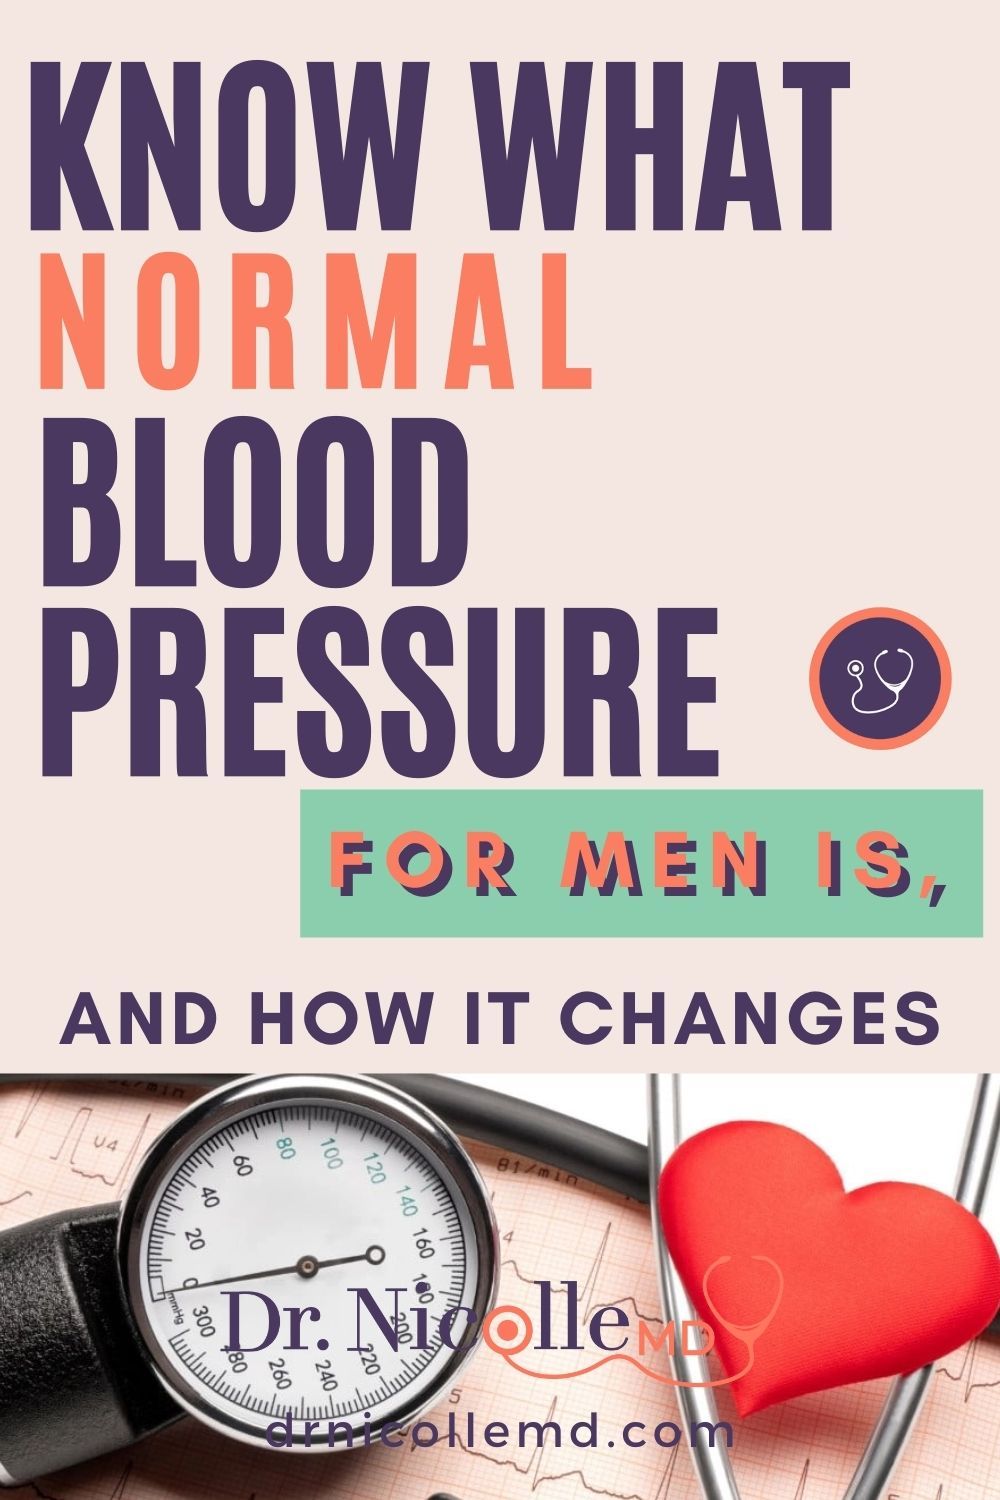 Know What Normal Blood Pressure For Men Is, And How It Changes